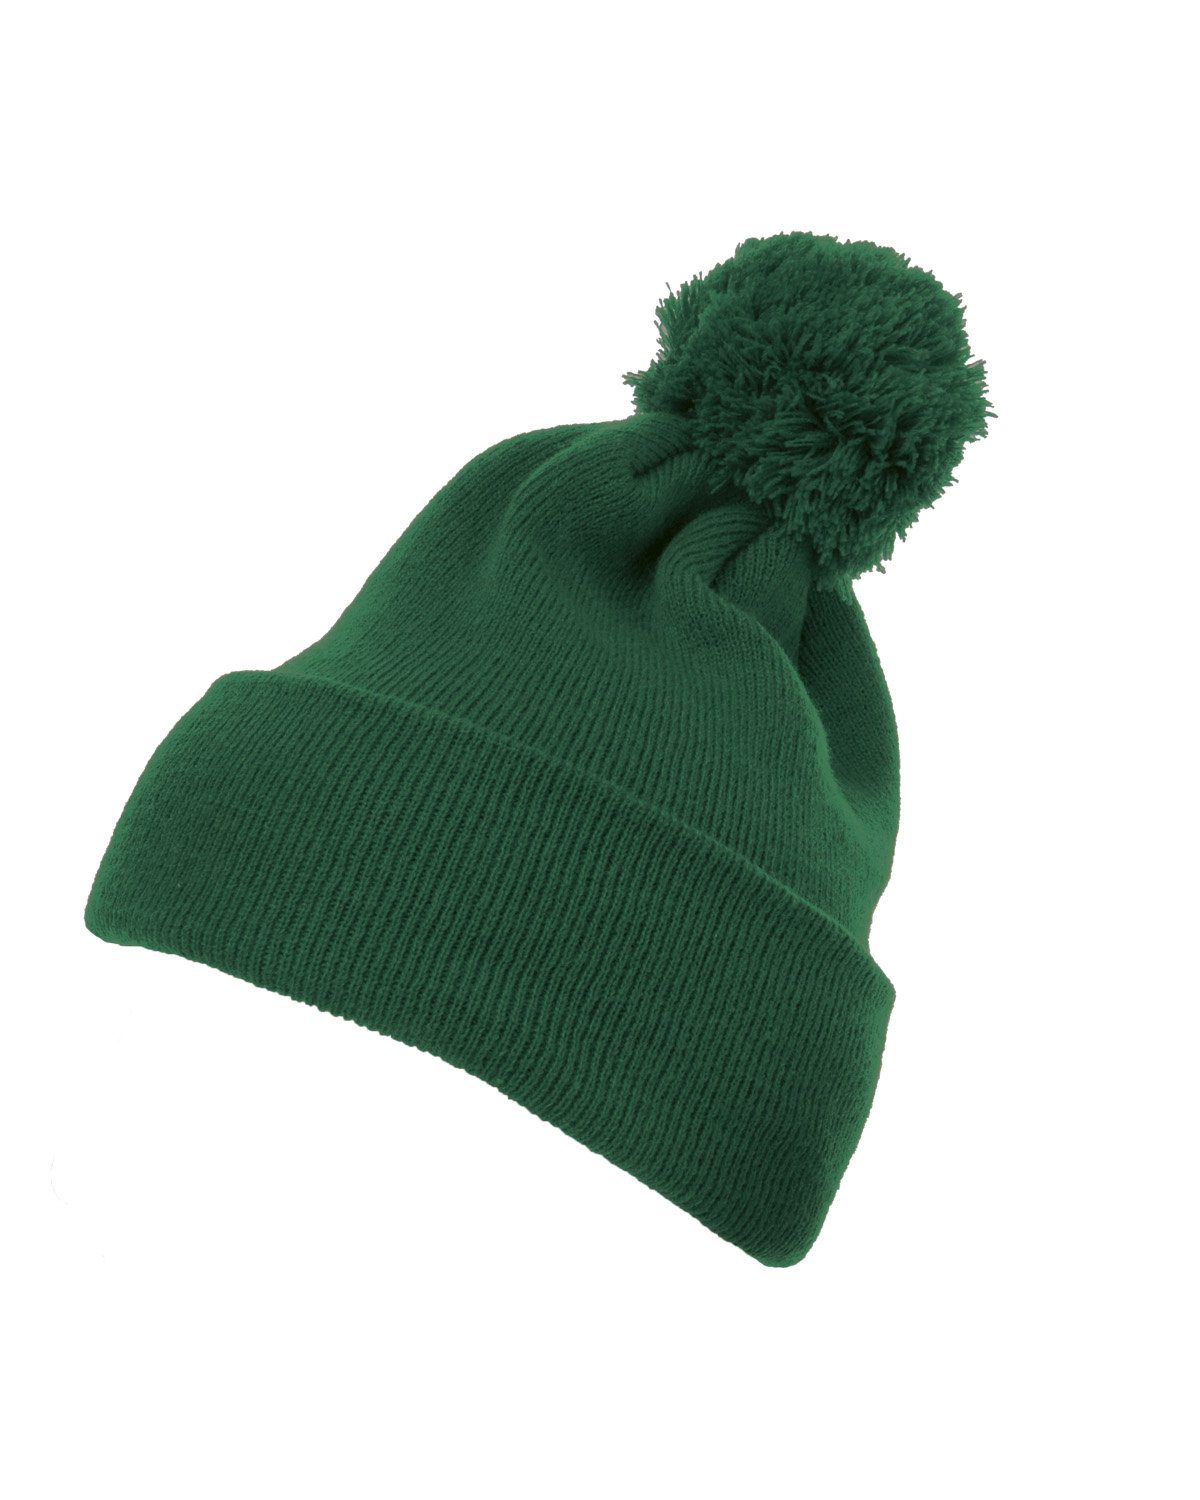 Yupoong Cuffed Knit Beanie with Pom Pom Hat | alphabroder